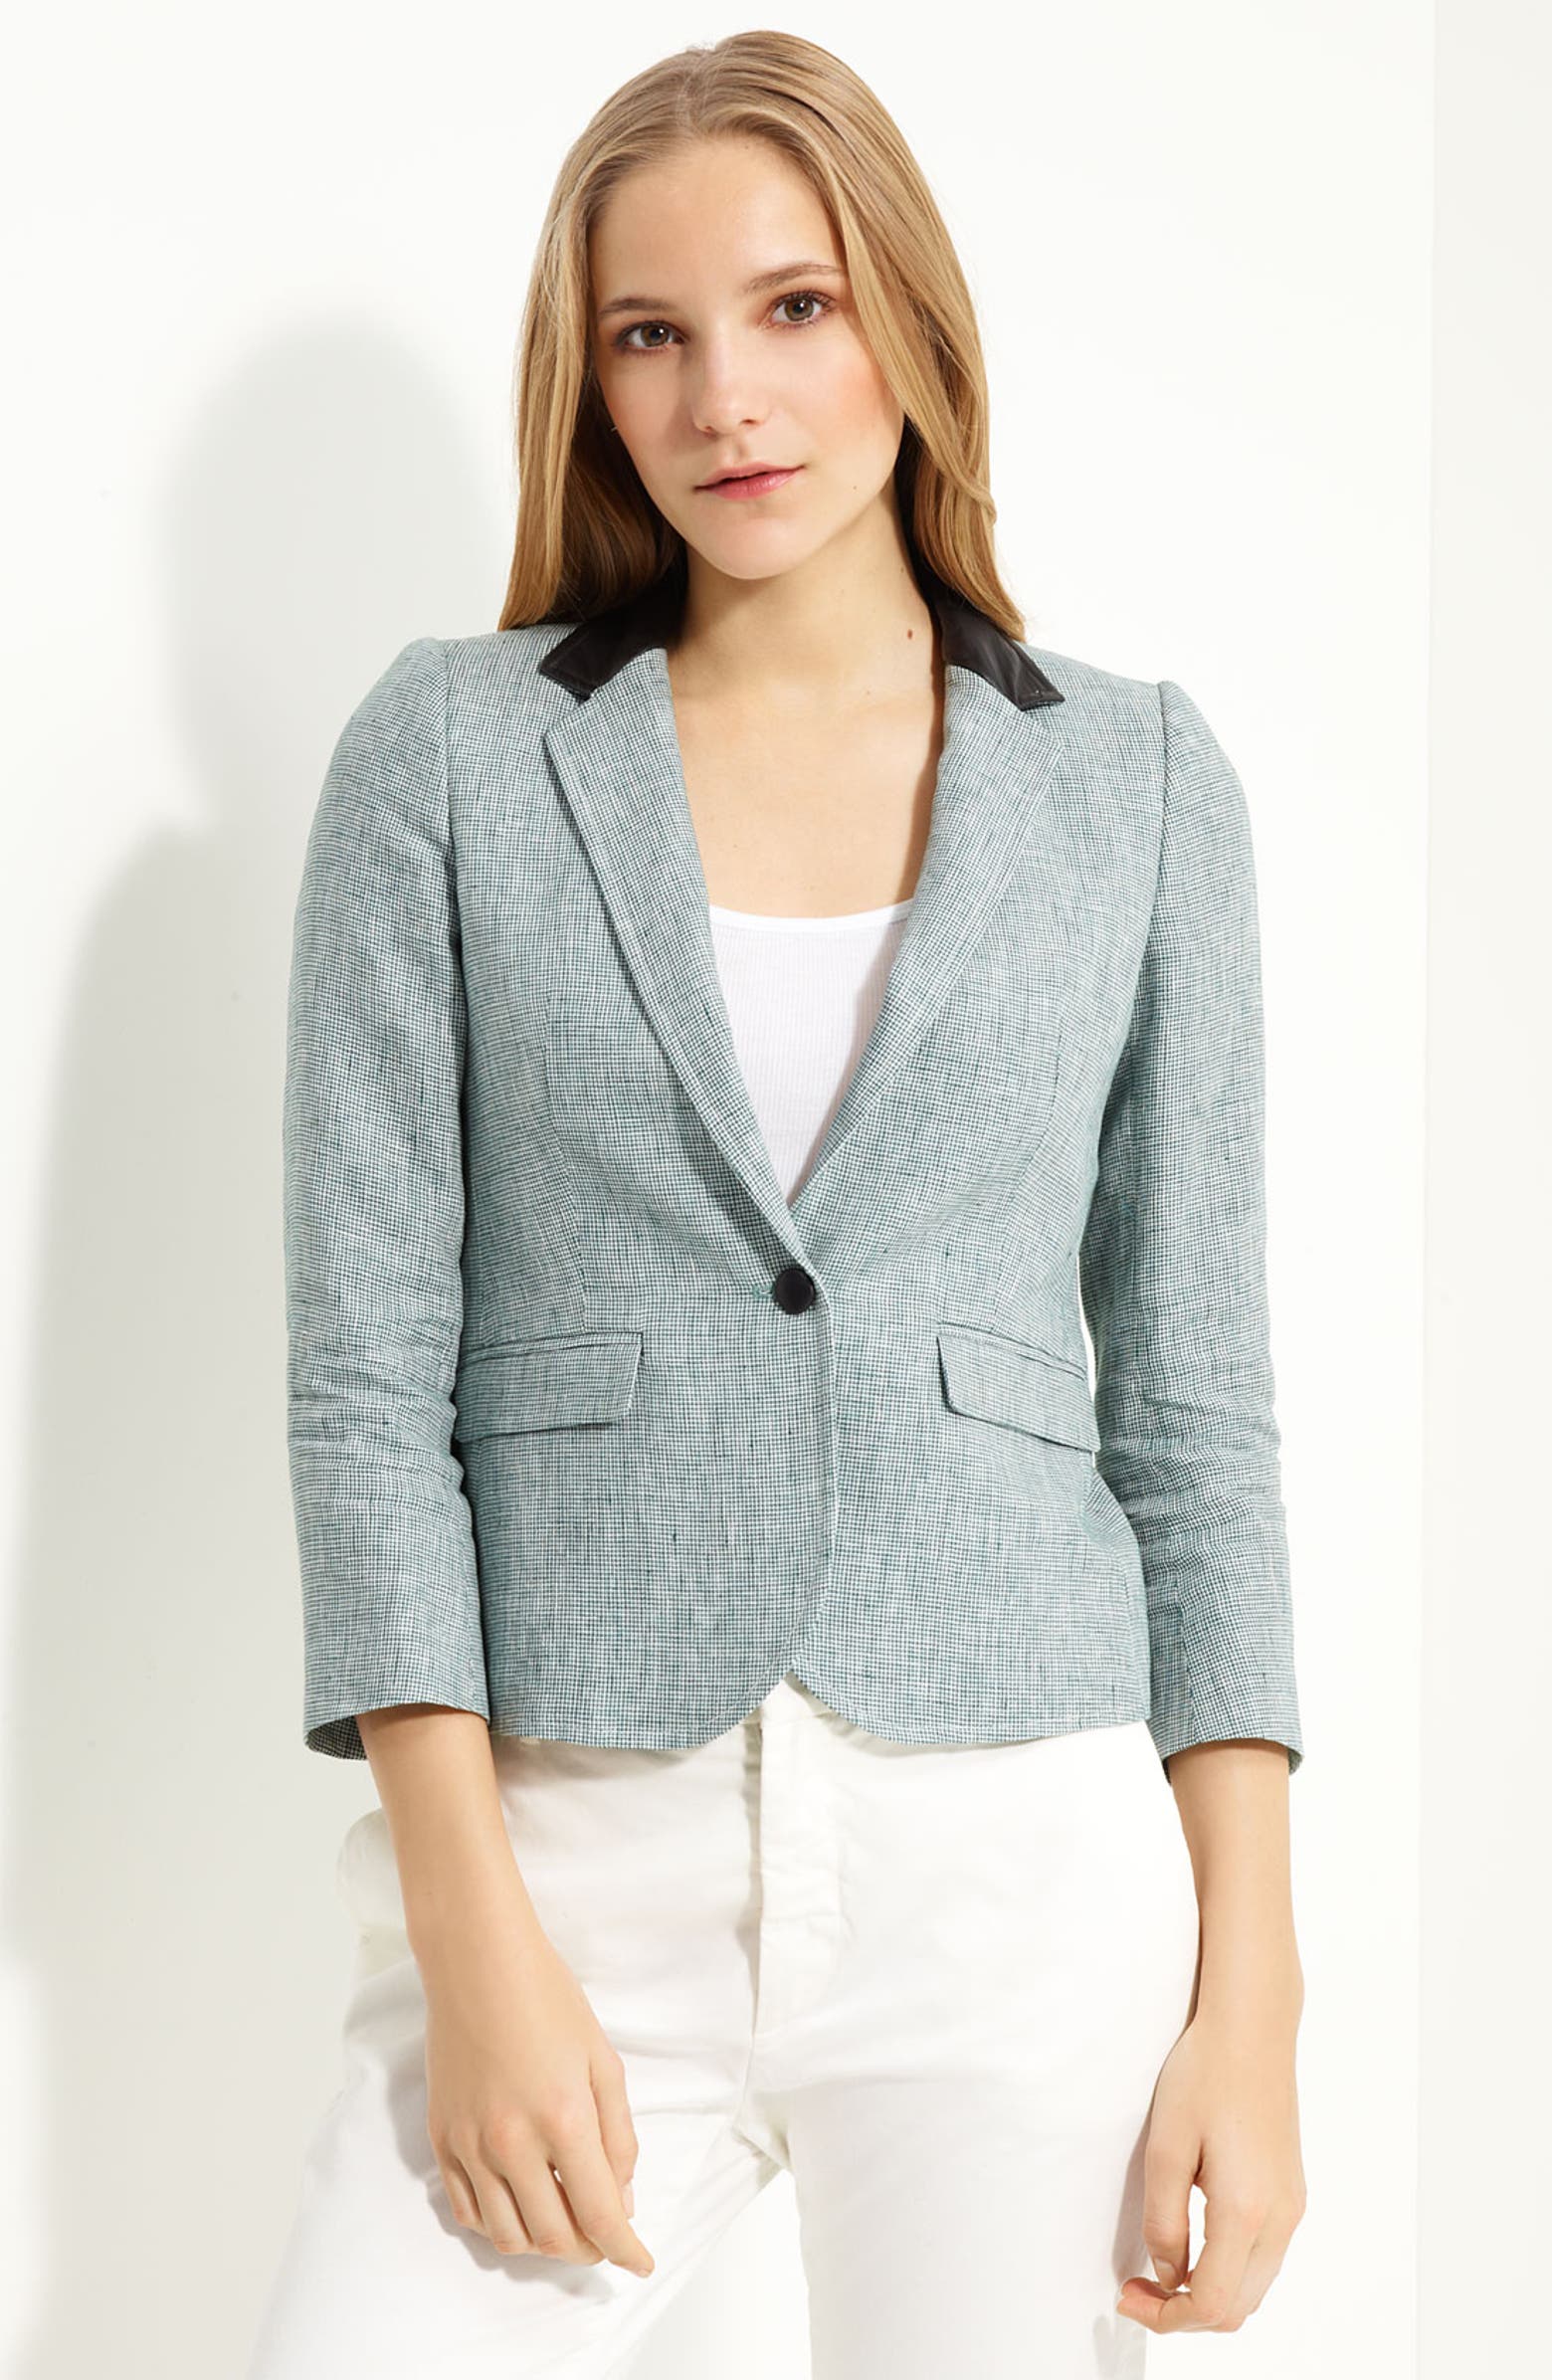 Band of Outsiders 'Schoolboy' Linen Jacket | Nordstrom